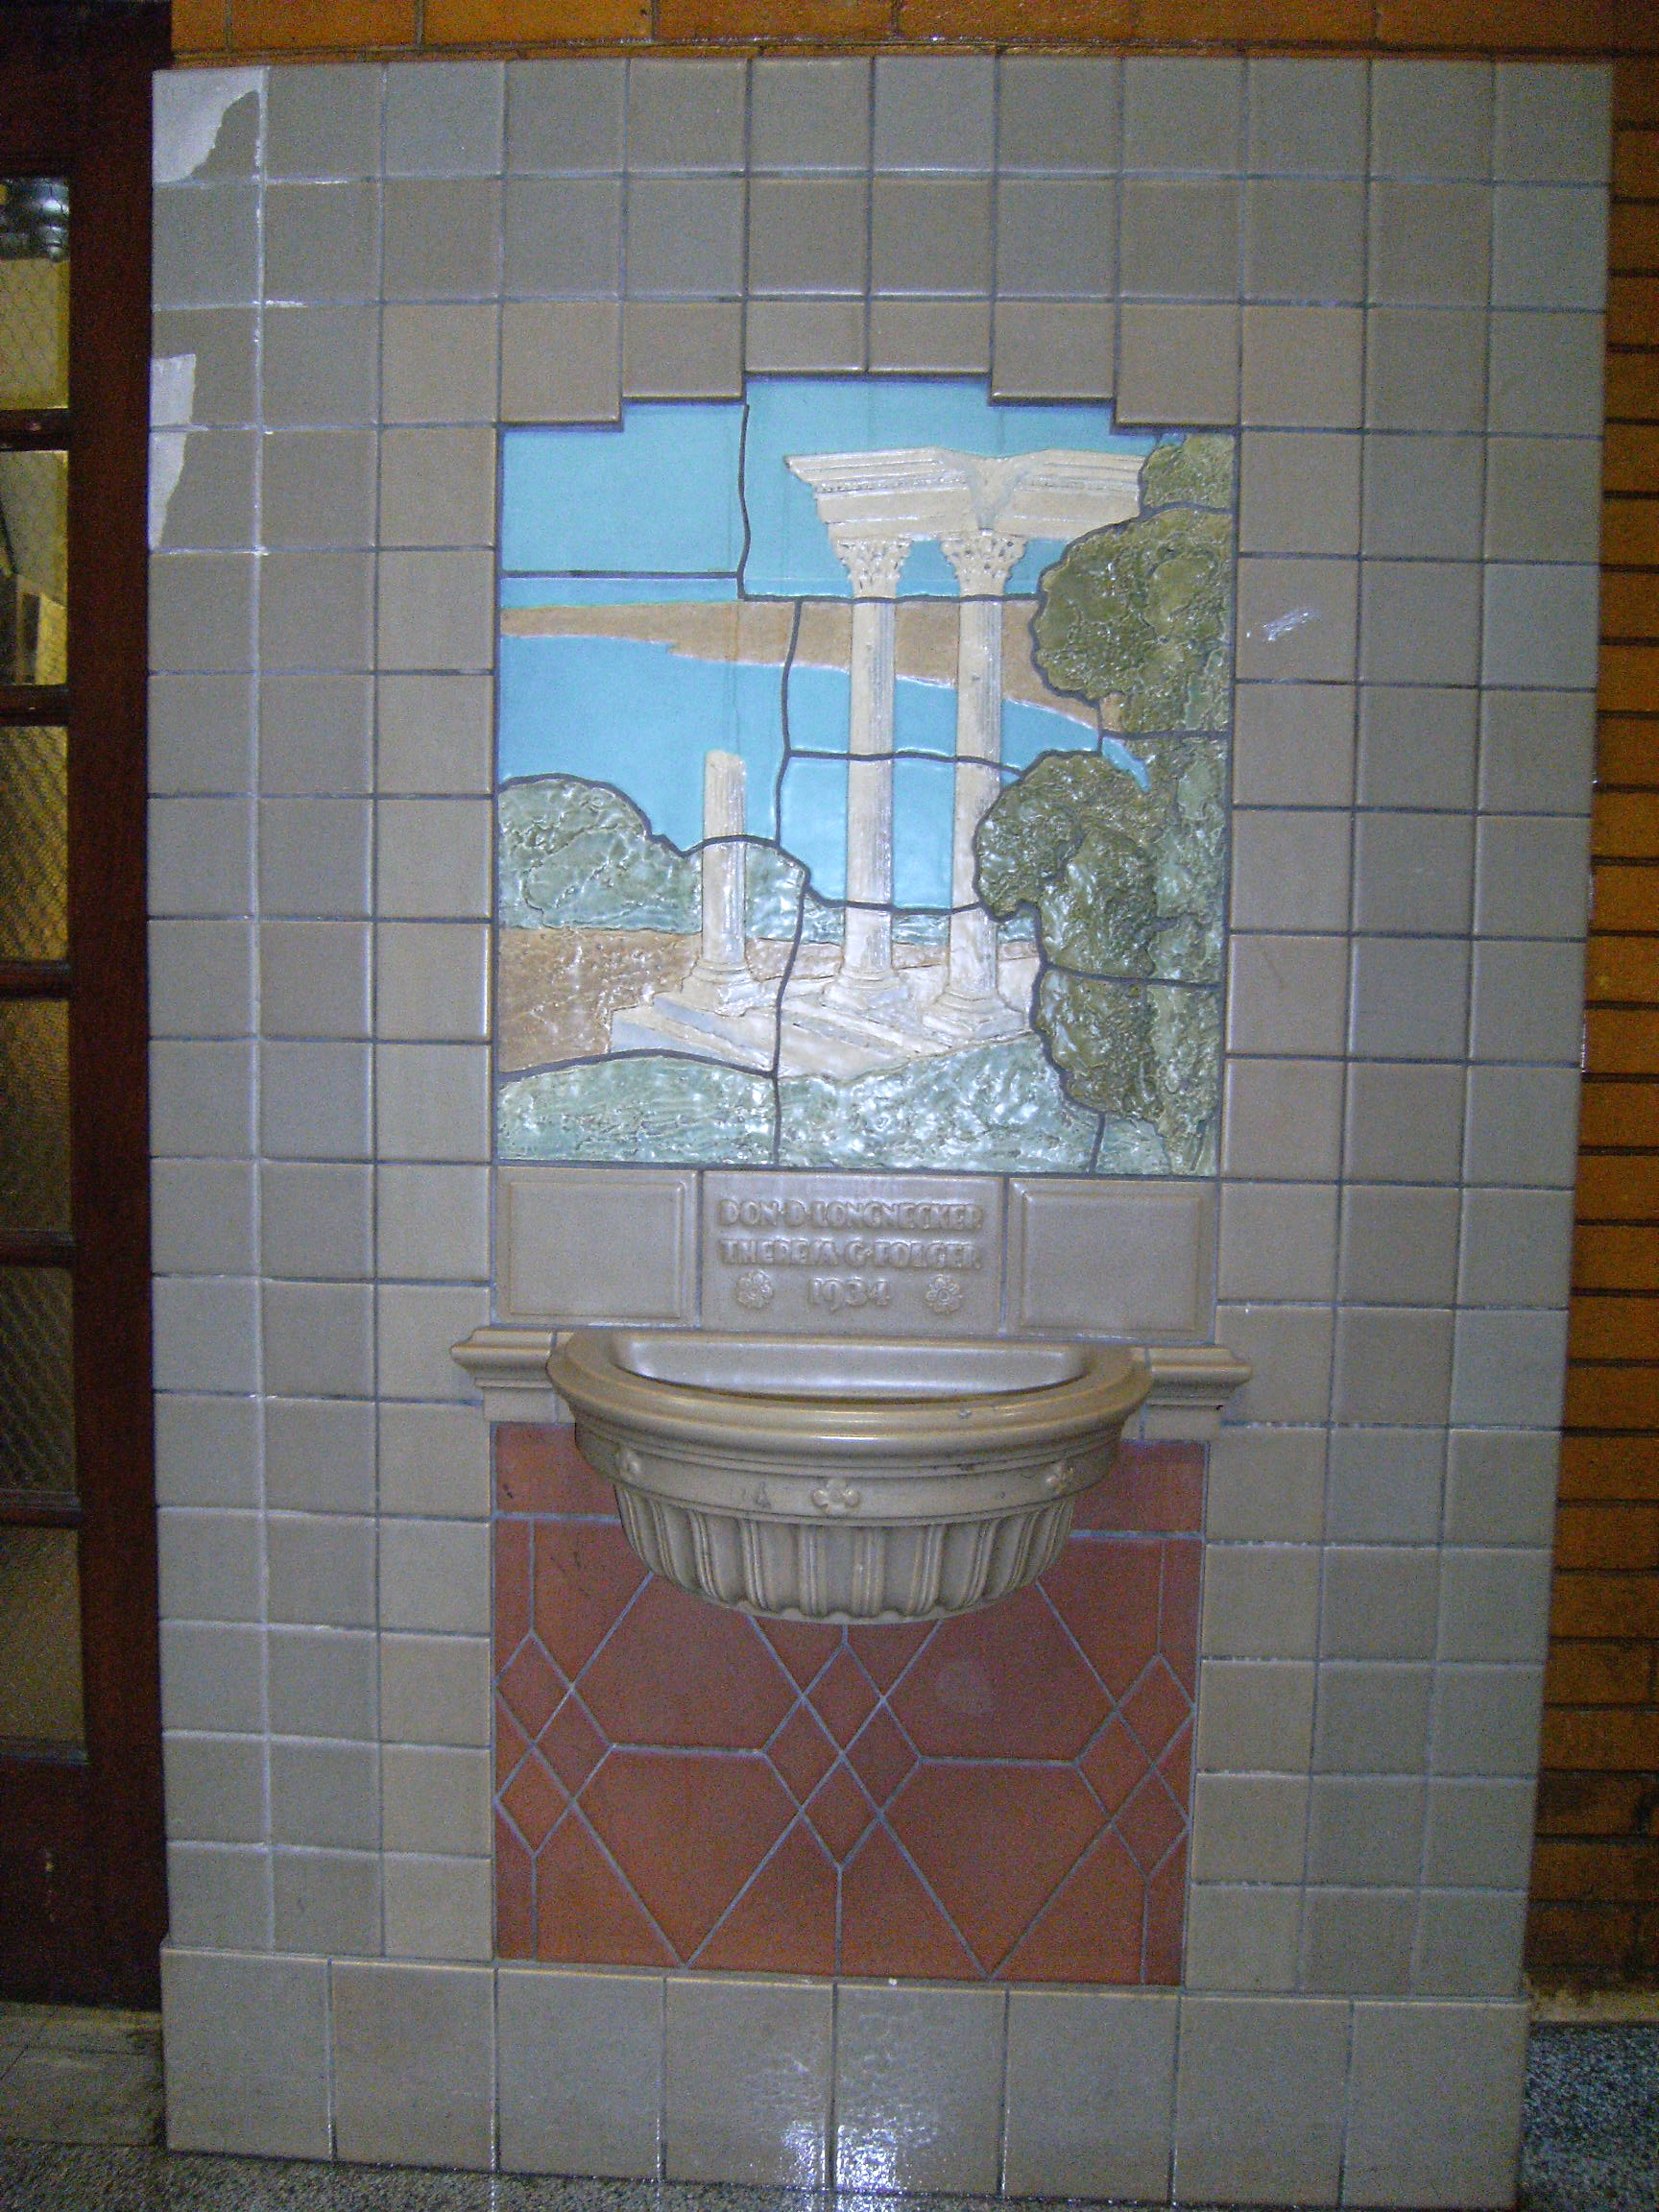 The Rookwood fountain located on the first floor near the middle stairway facing Hillcrest. Dedicated in 1934 to then Assistant Principal Miss Theresa Folger and Principal Don Longnecker. It was restored by Bob Mousaian and is now displayed at the new NW 